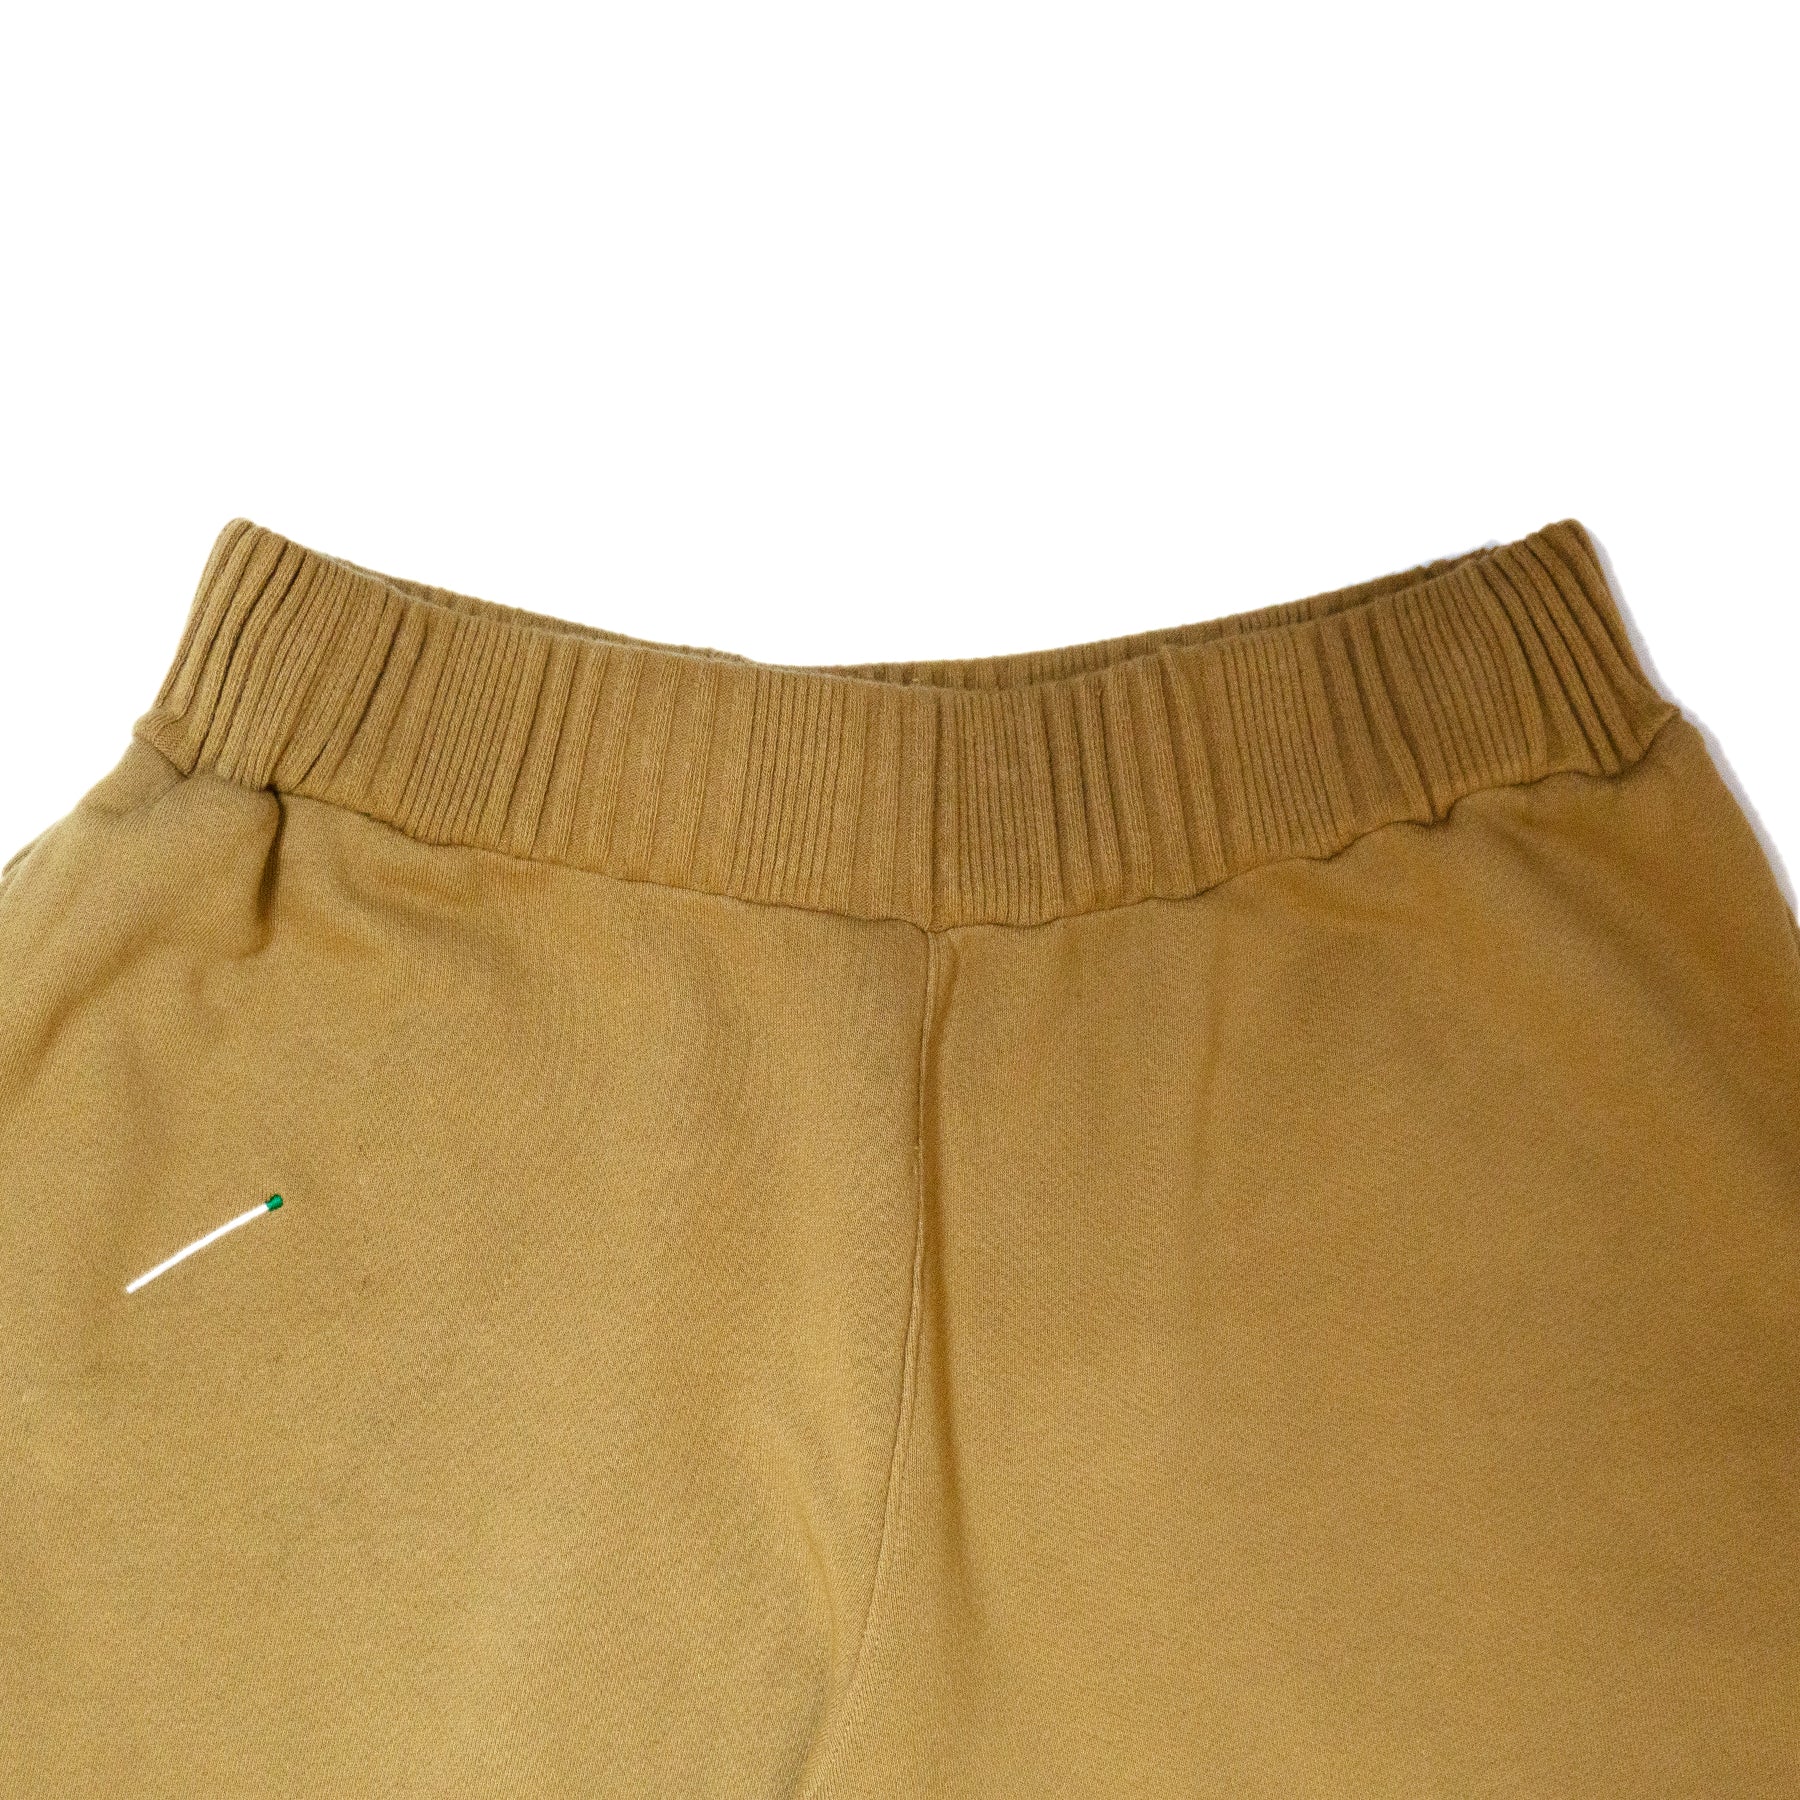 100% cotton french terry Thick rib waistband Raw edge hem Matchstick embroidery Made in Los Angeles